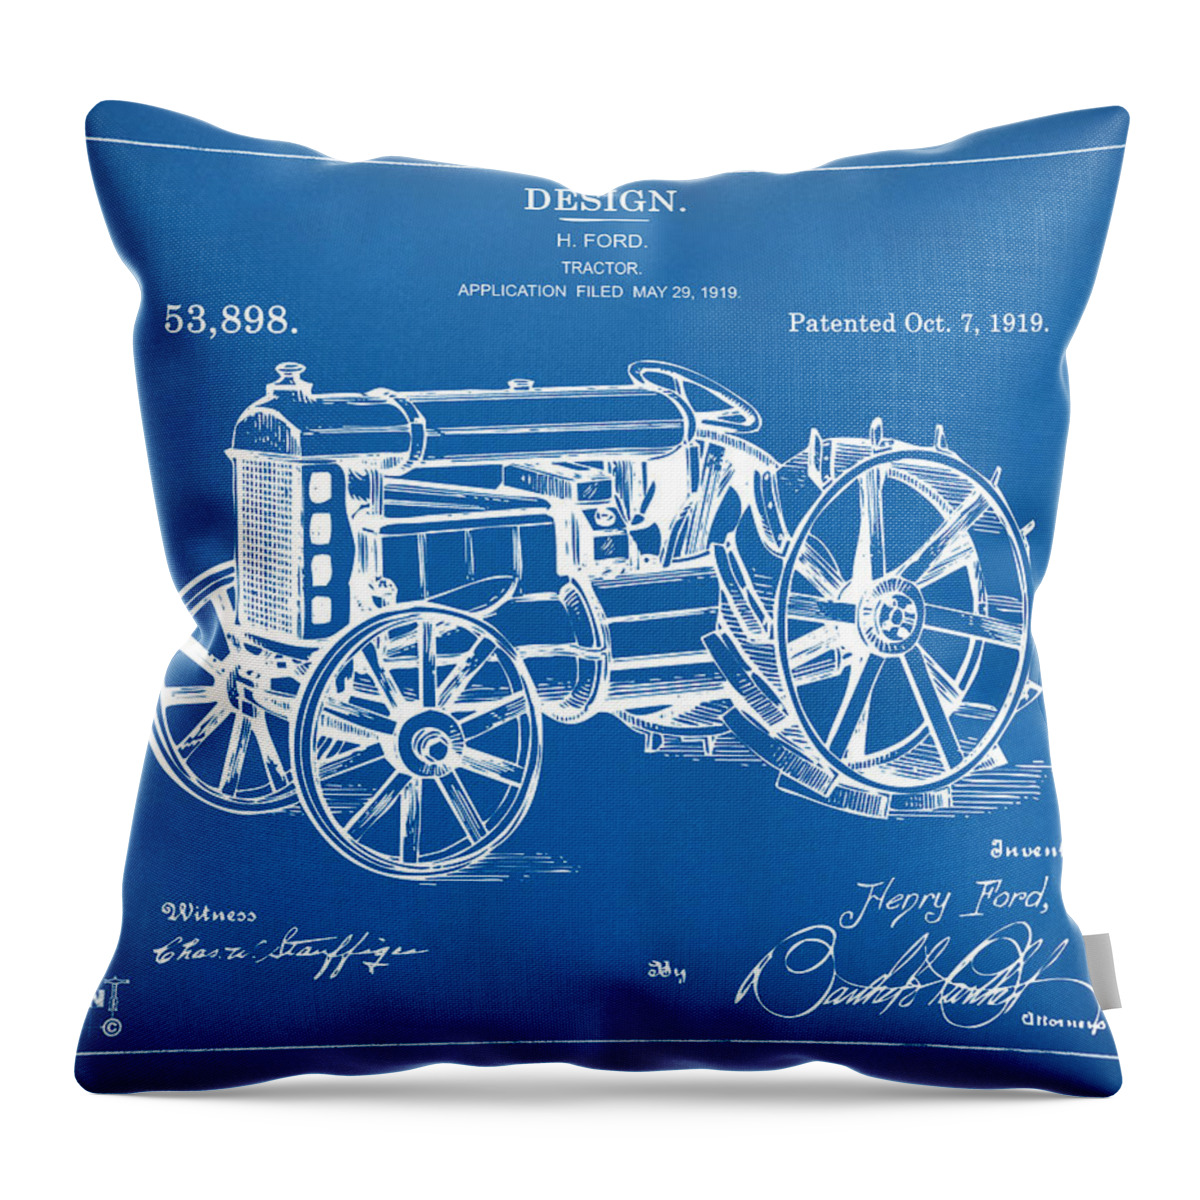 Henry Ford Throw Pillow featuring the digital art 1919 Henry Ford Tractor Patent Blueprint by Nikki Marie Smith